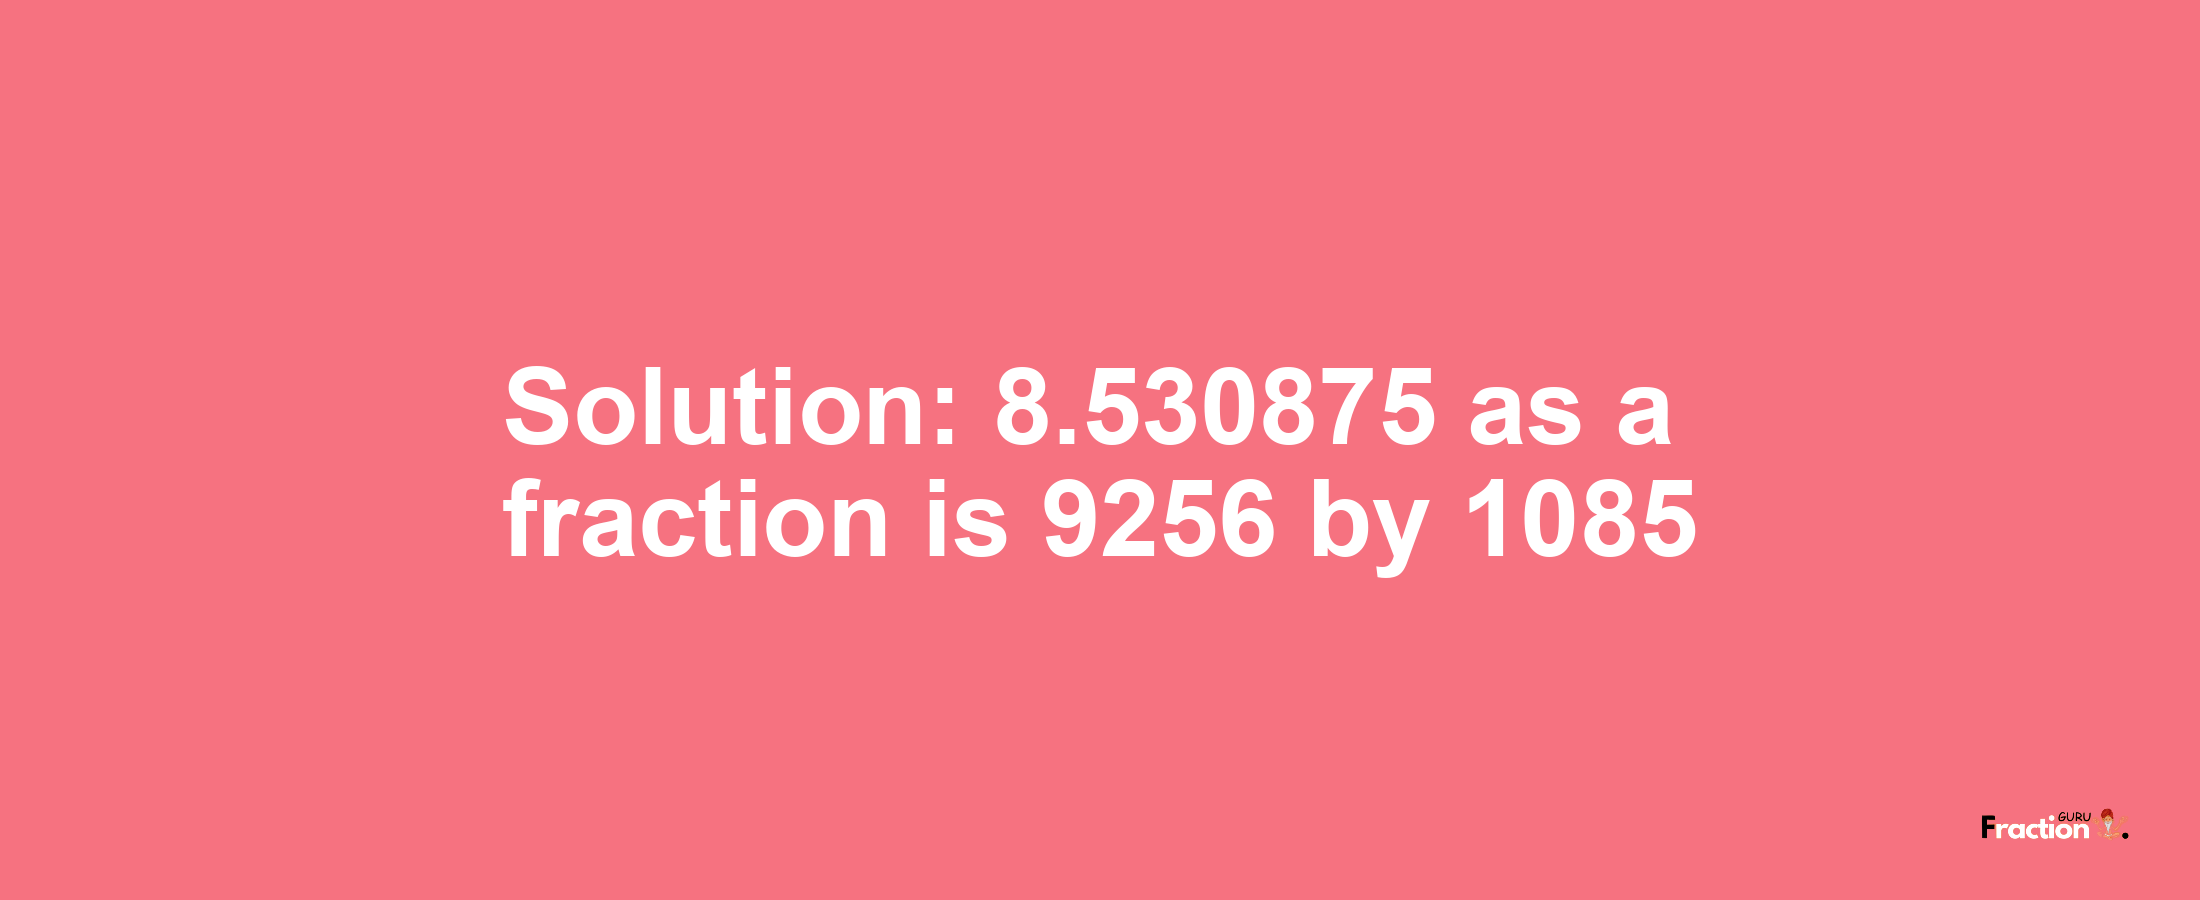 Solution:8.530875 as a fraction is 9256/1085